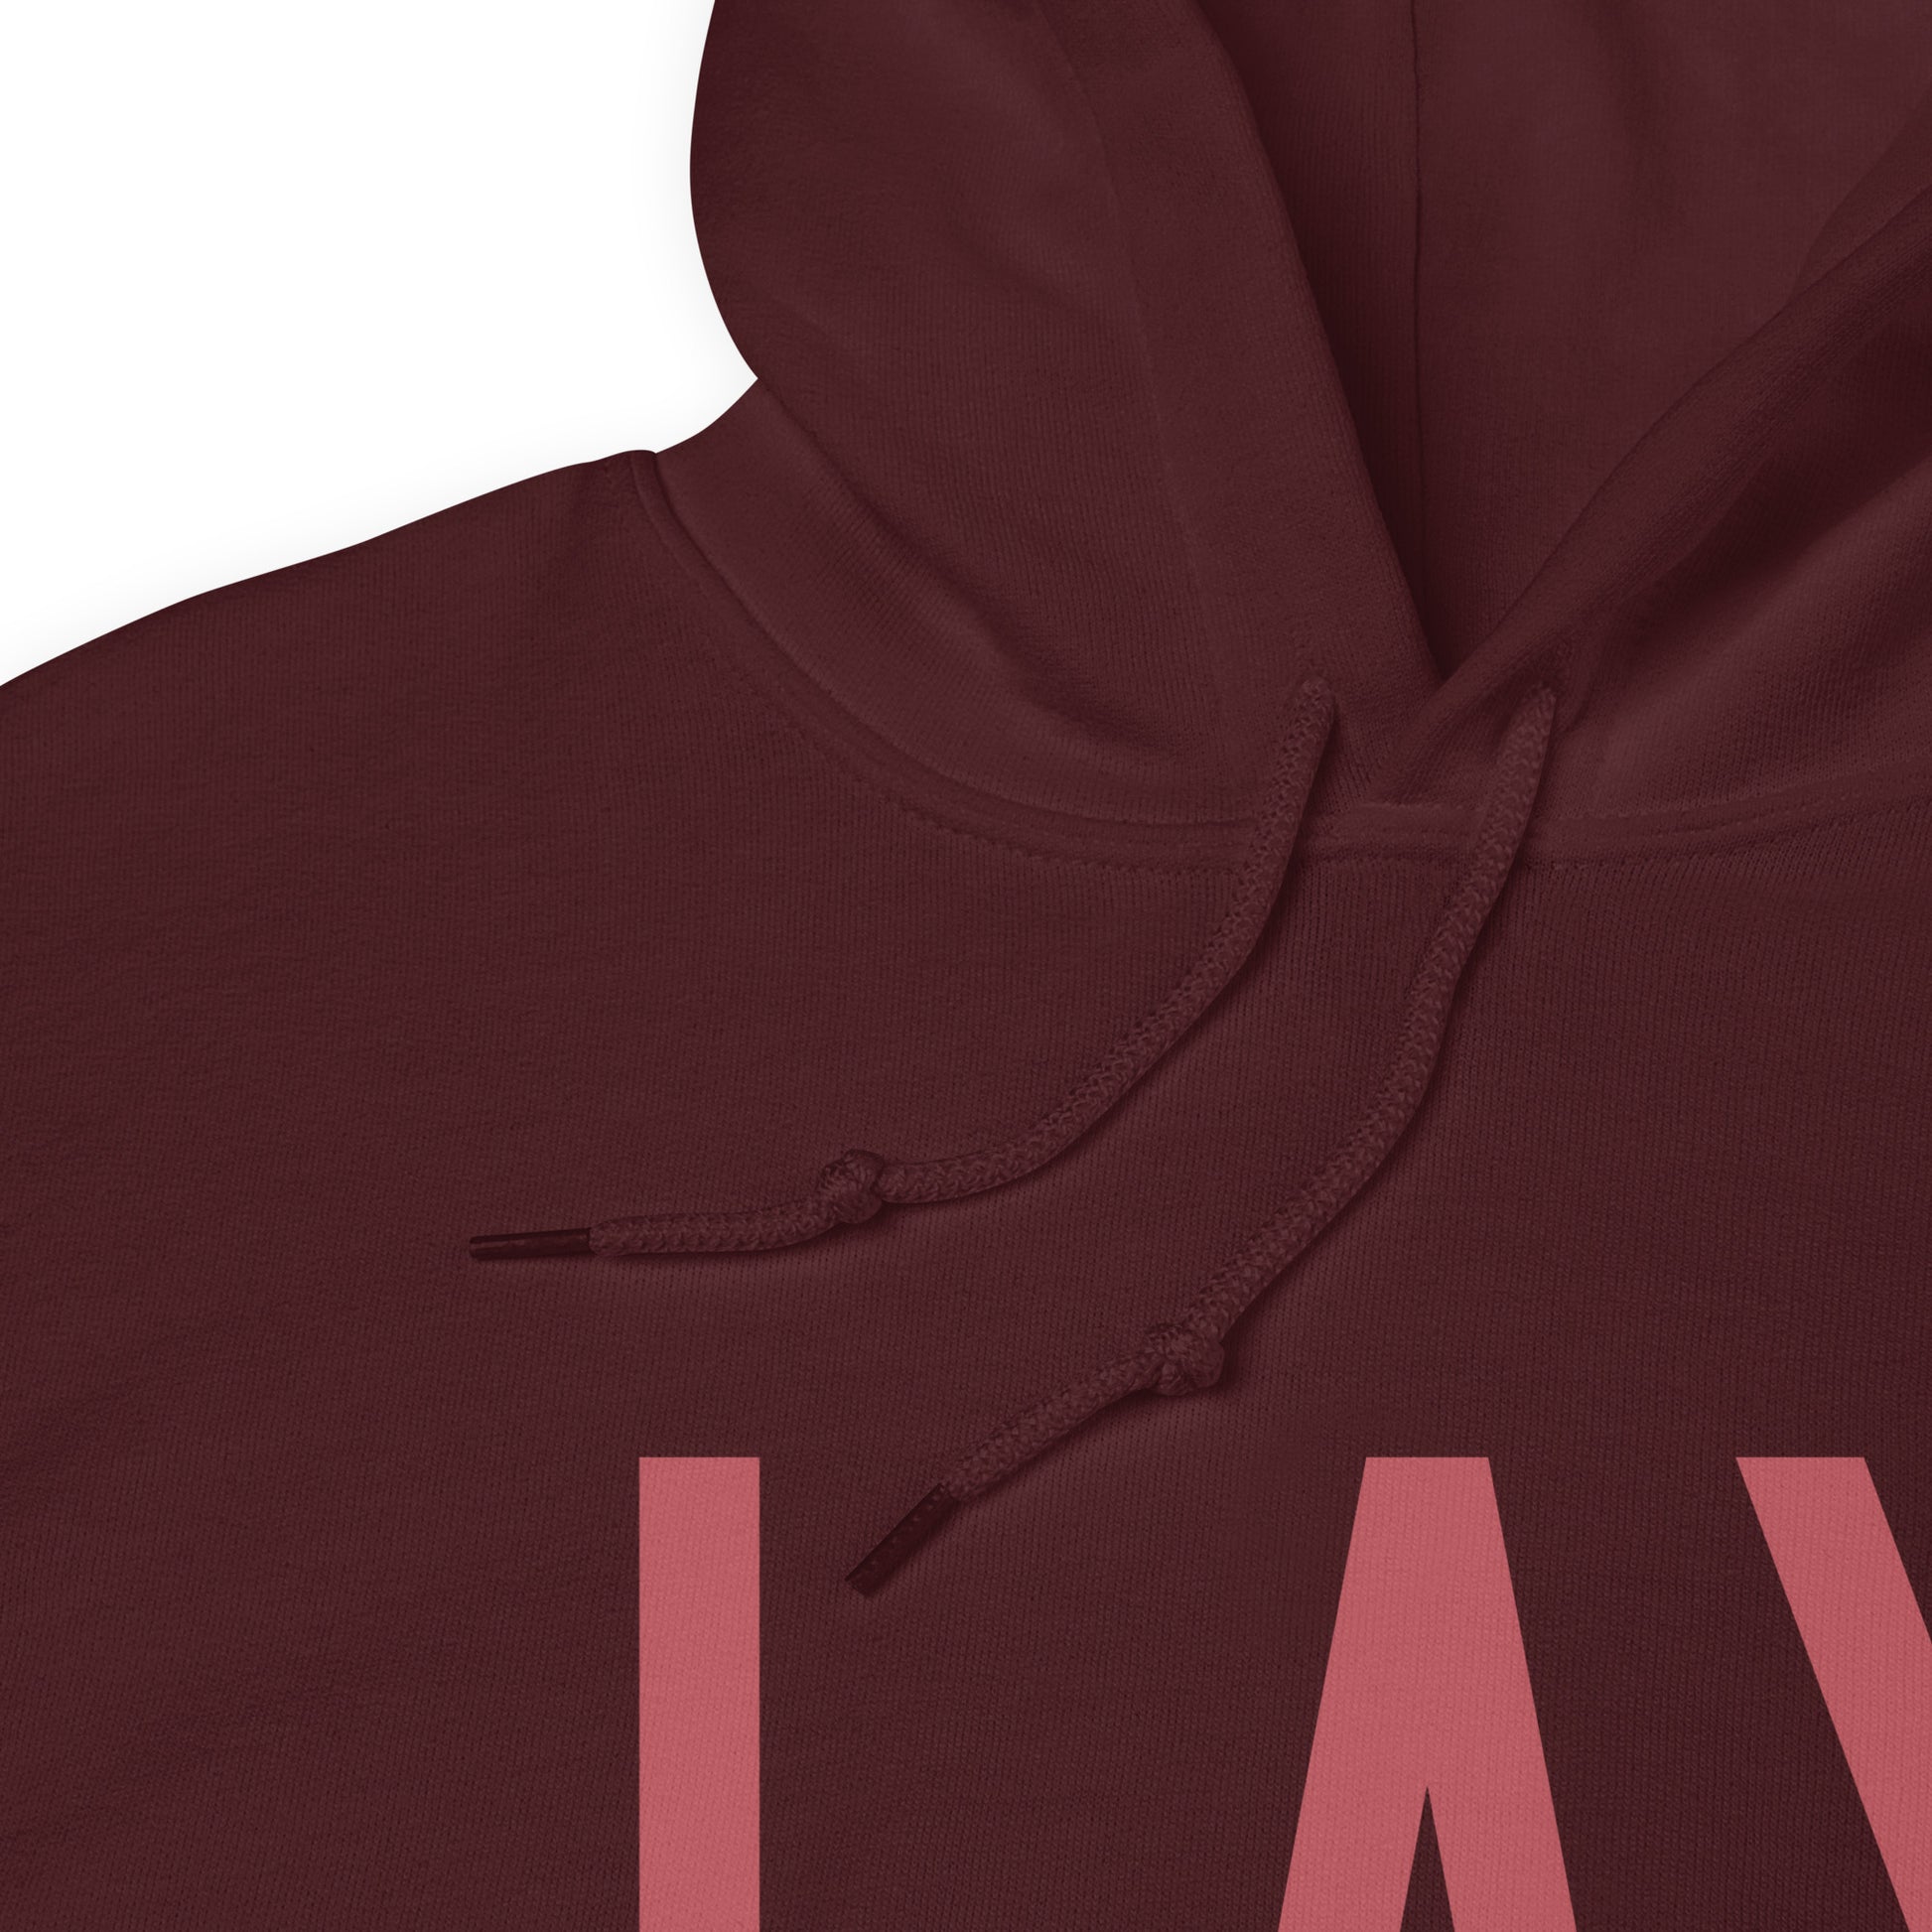 Aviation Enthusiast Hoodie - Deep Pink Graphic • LAX Los Angeles • YHM Designs - Image 08